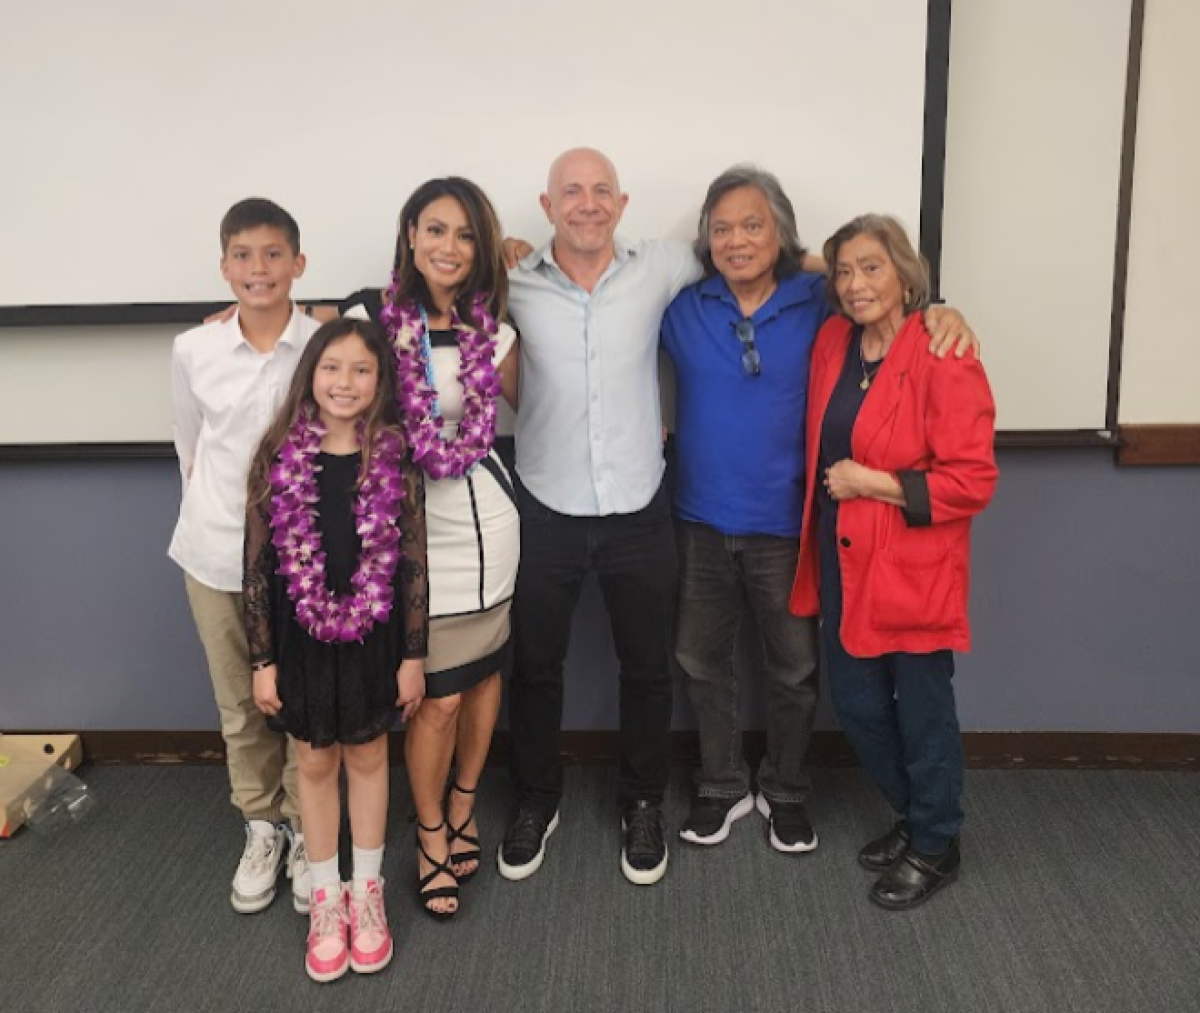 Professor Labio with her family at Southwestern College